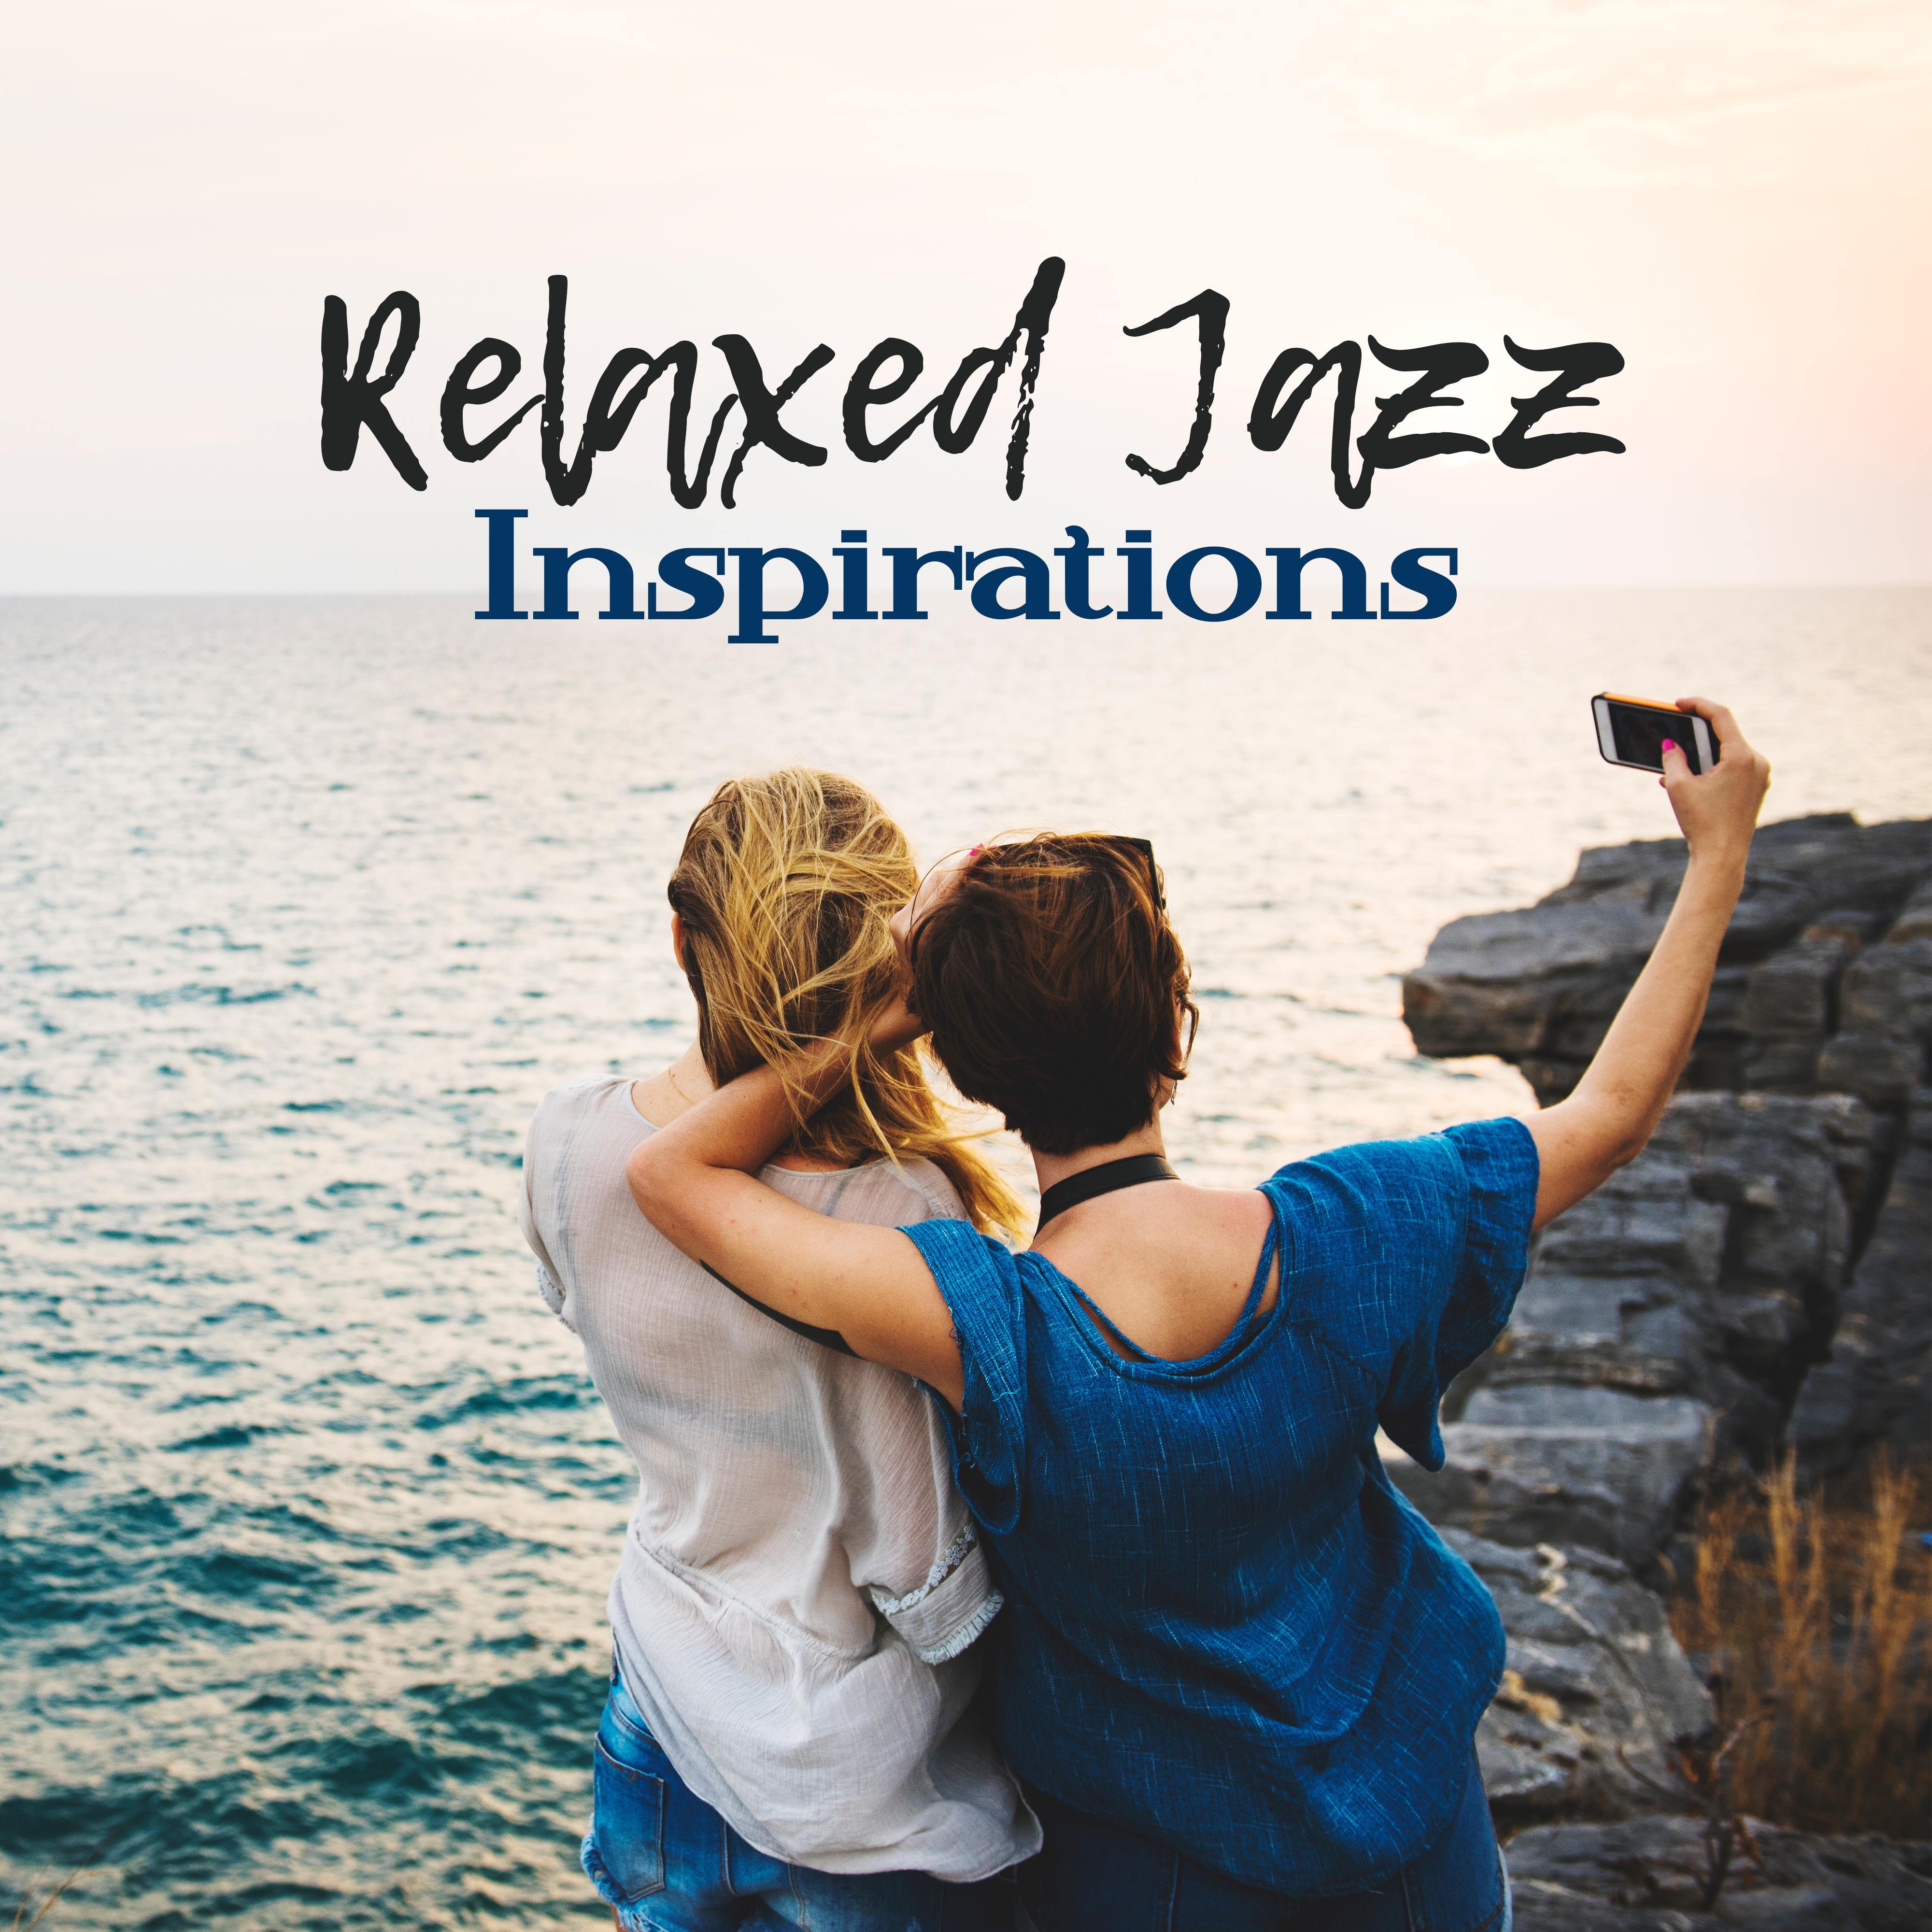 Relaxed Jazz Inspirations  Calm Piano Music, Smooth Jazz, Relaxing Music 2017, Ambient Instrumental